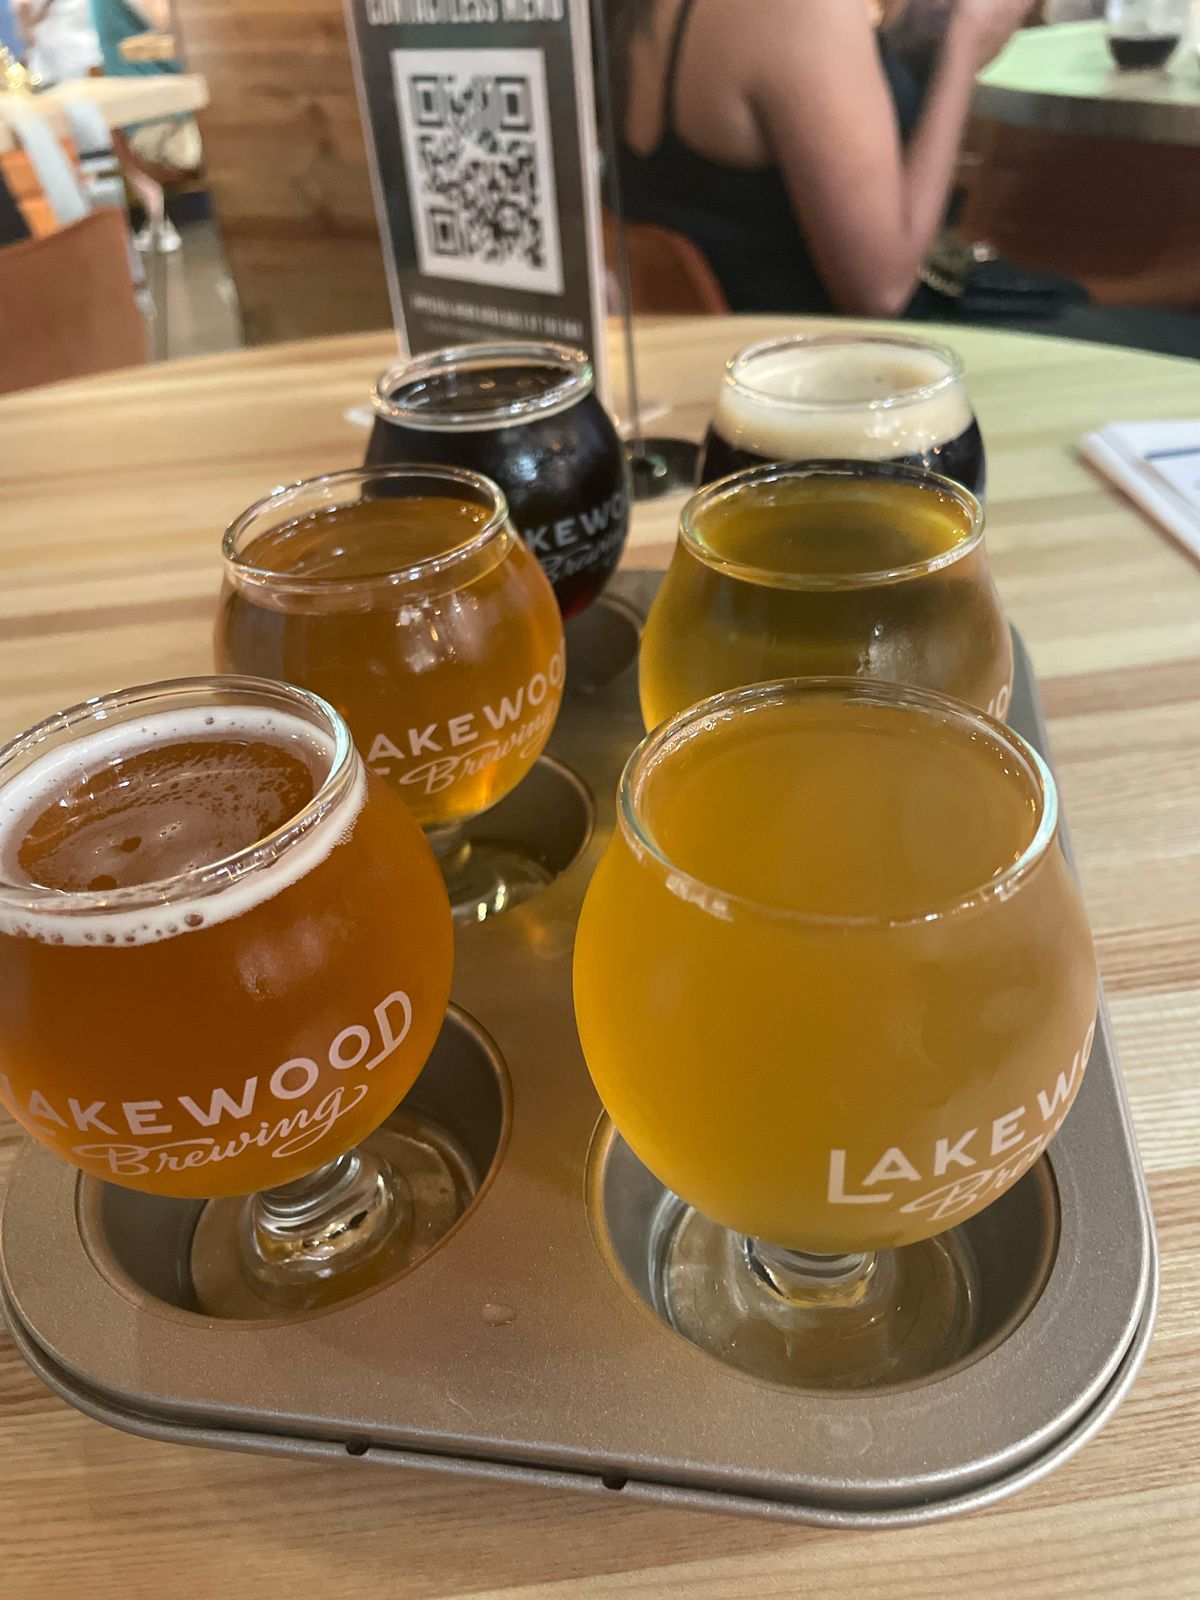 In a muffin tin, a collection of tasting sized glasses are filled with various beers. The glasses are emblazoned with “Lakewood Brewing” in white letters.